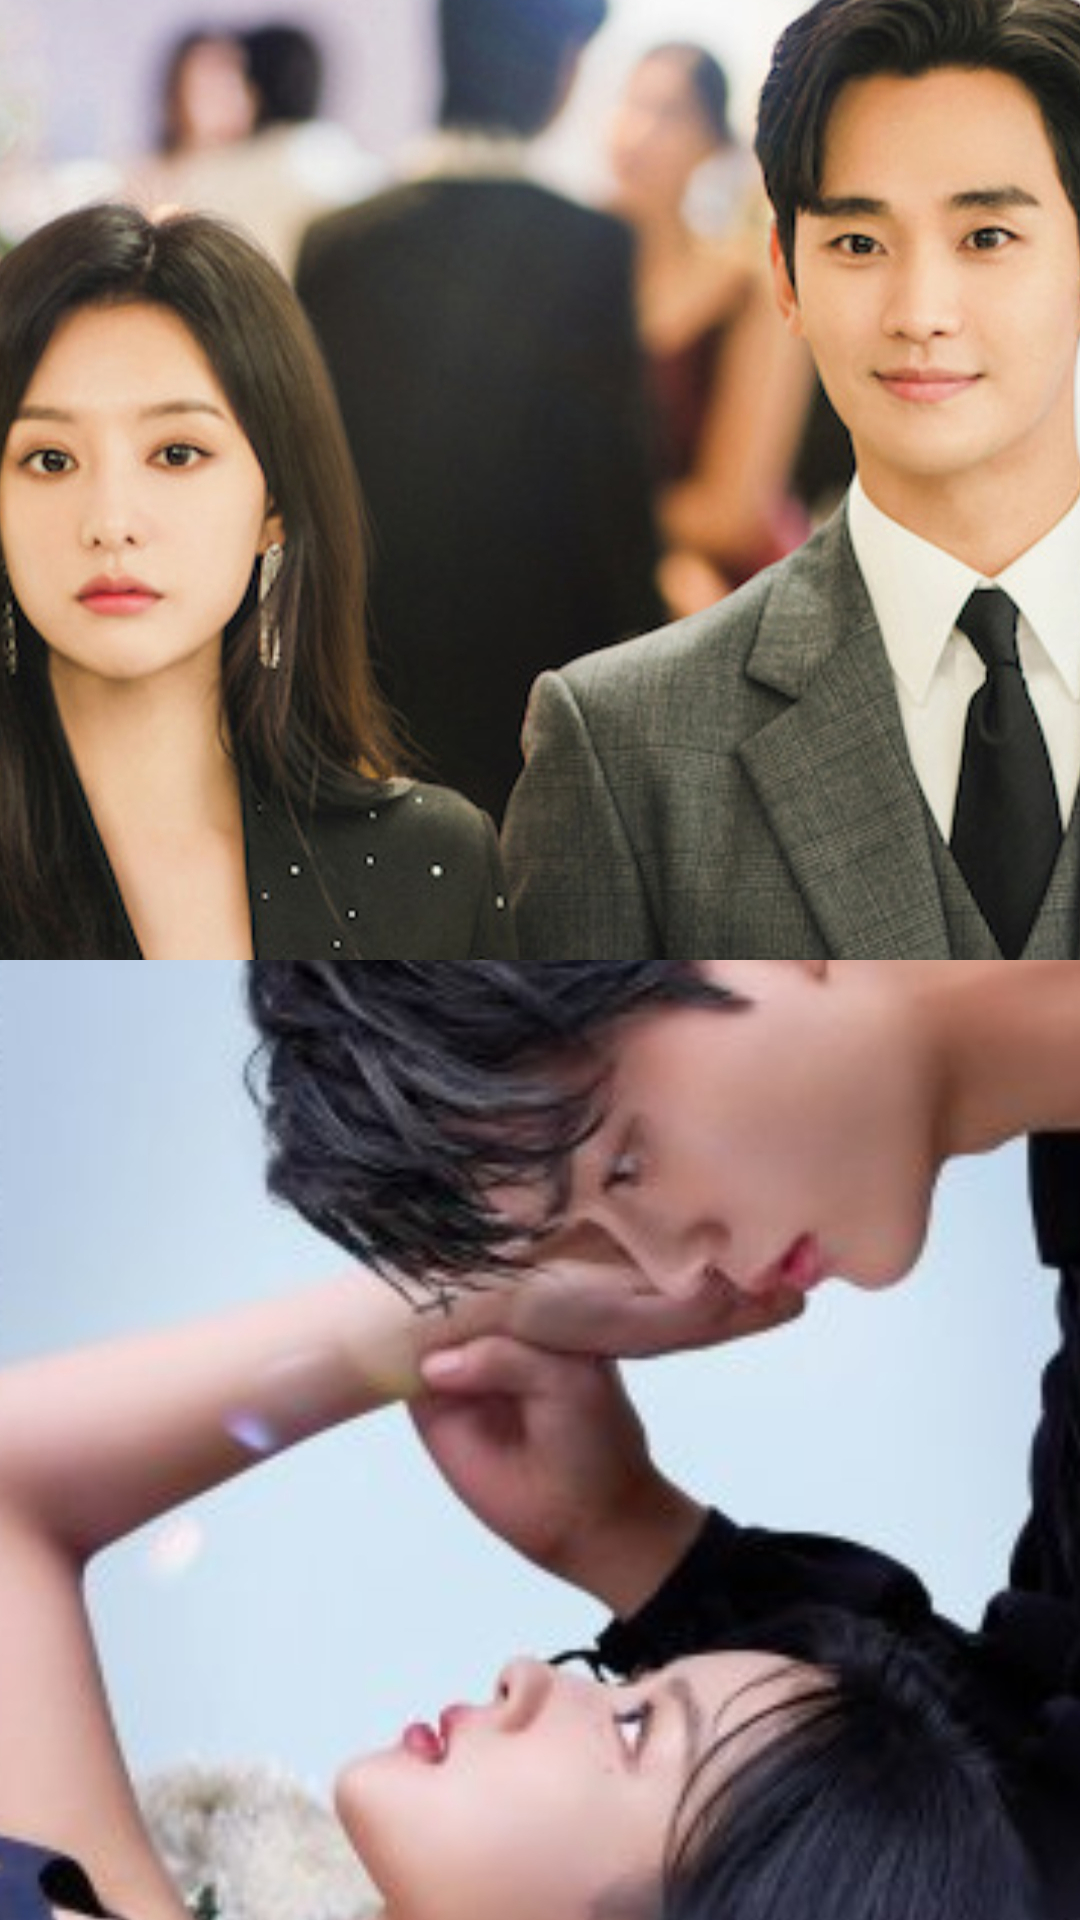 Queen of Tears to My Demon: K-Dramas with women as powerful CEOs